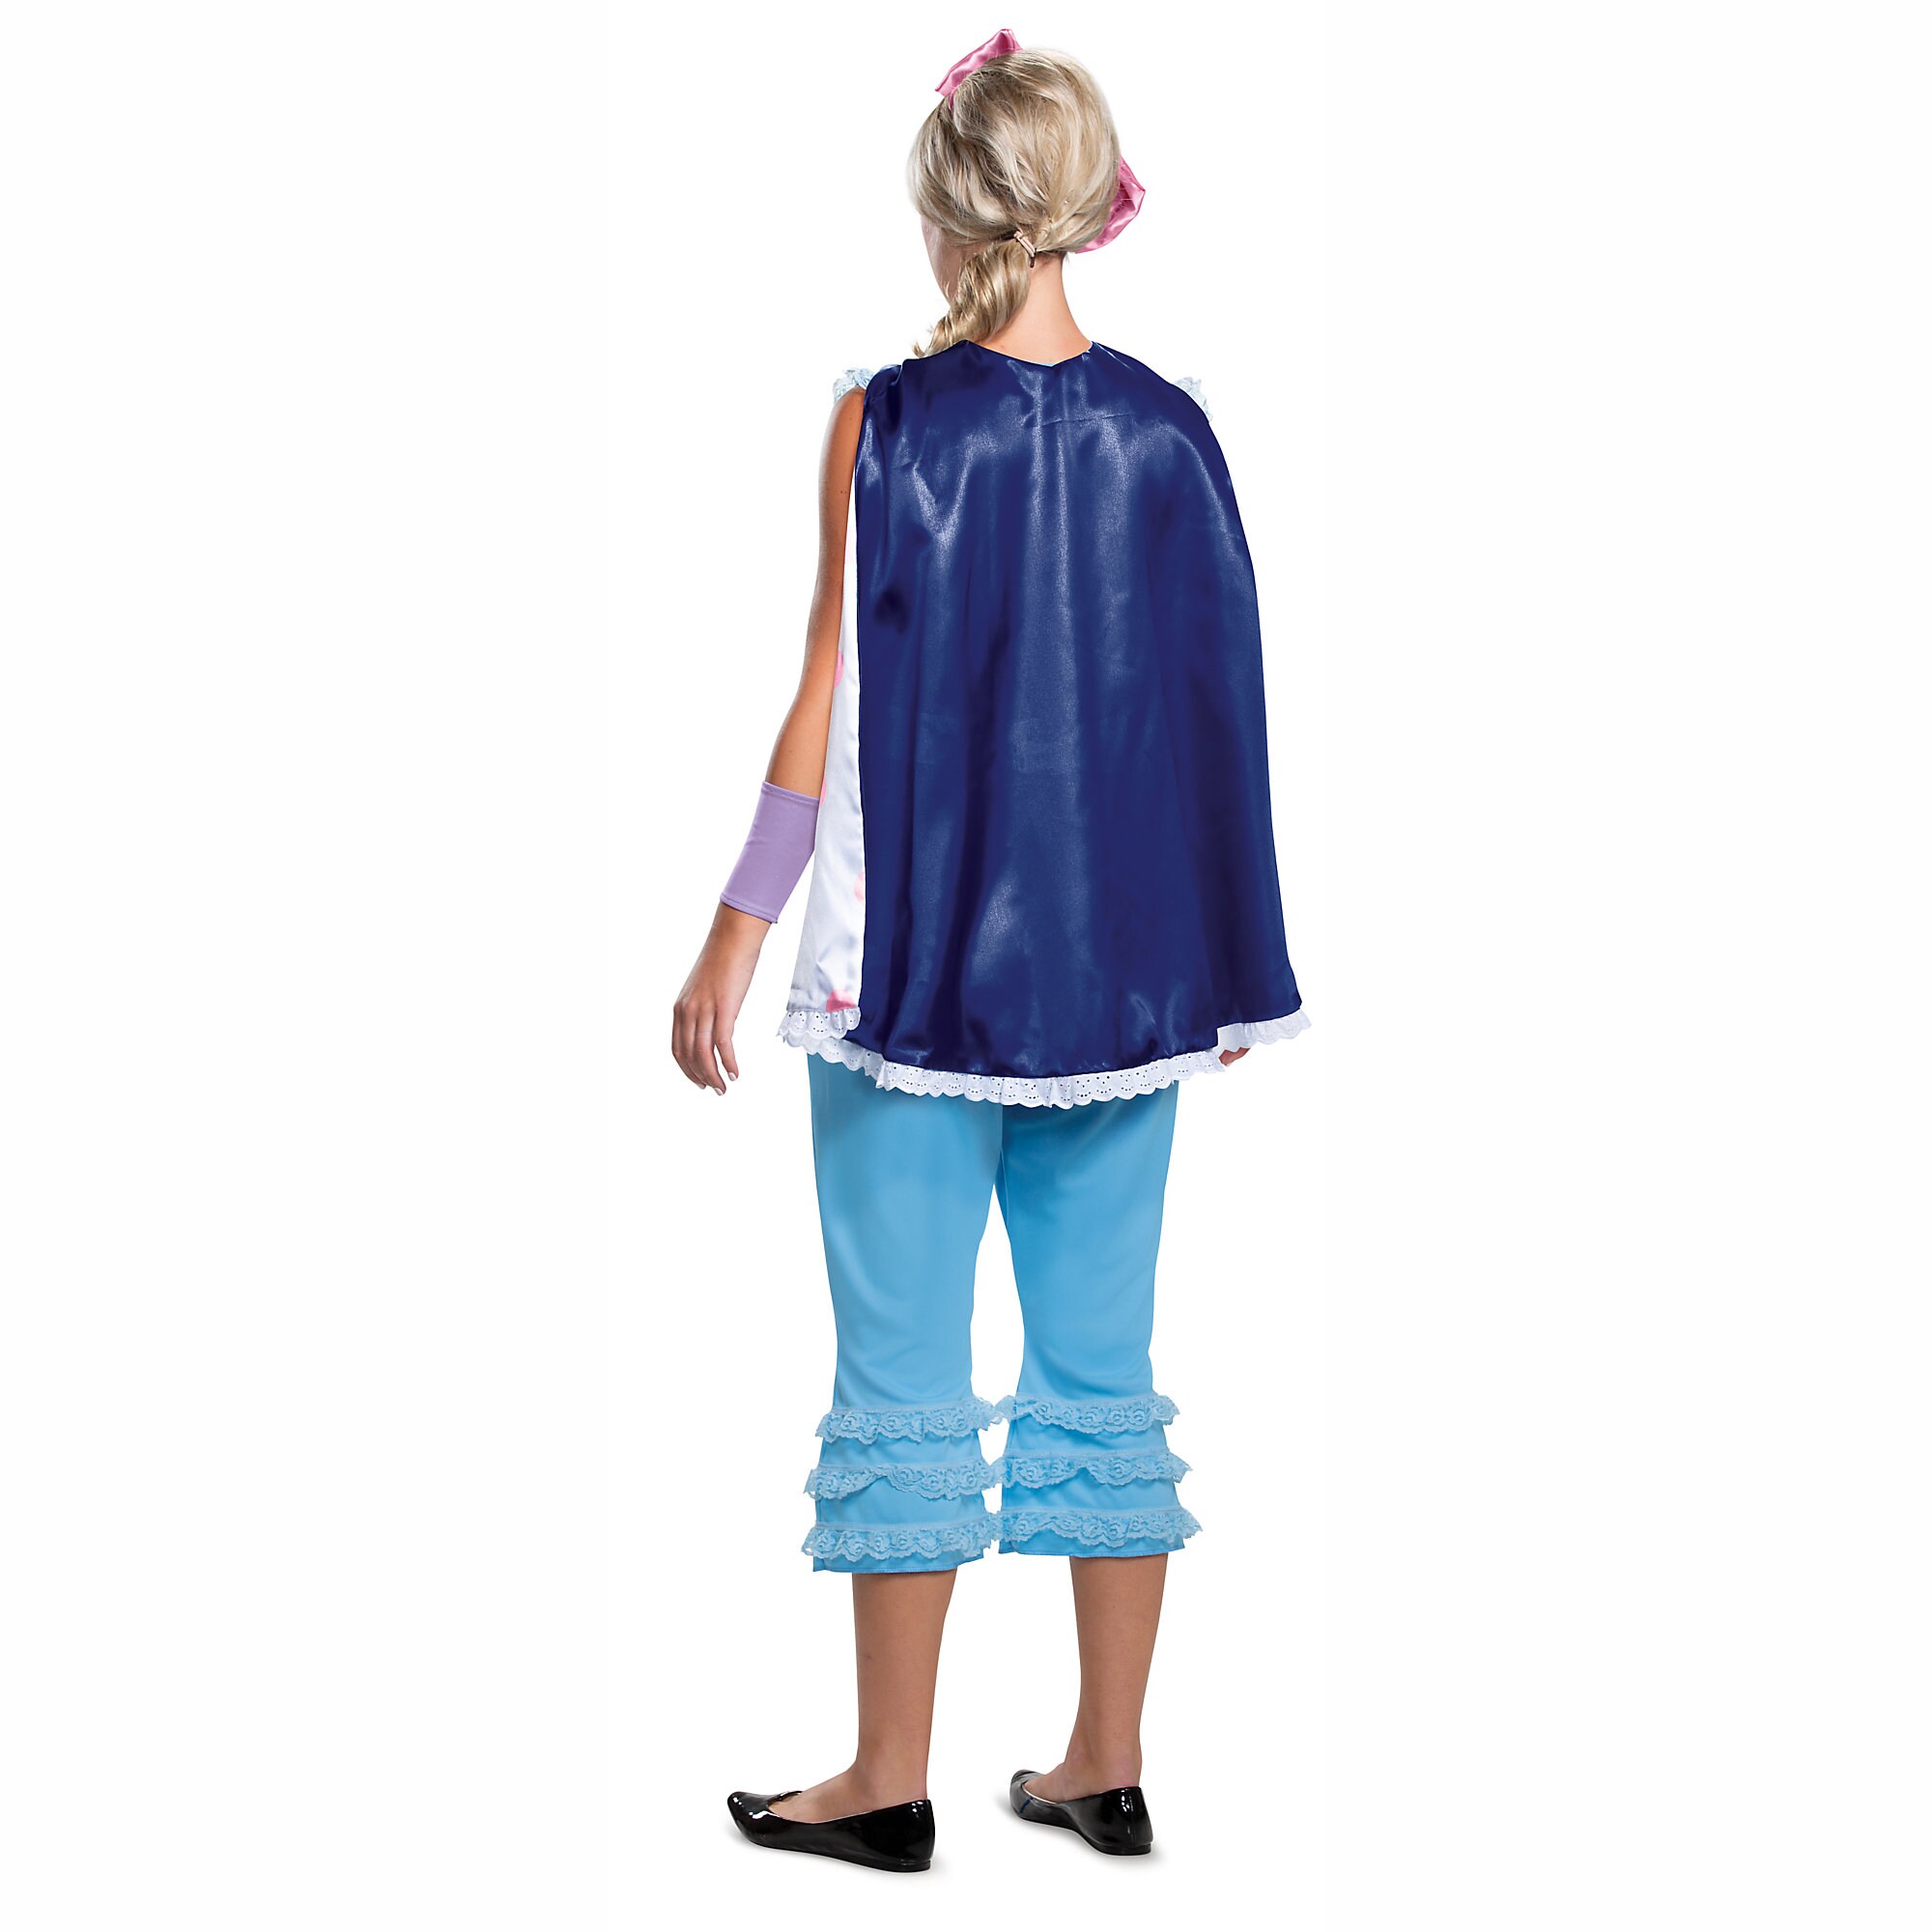 Bo Peep Deluxe Costume for Adults by Disguise - Toy Story 4